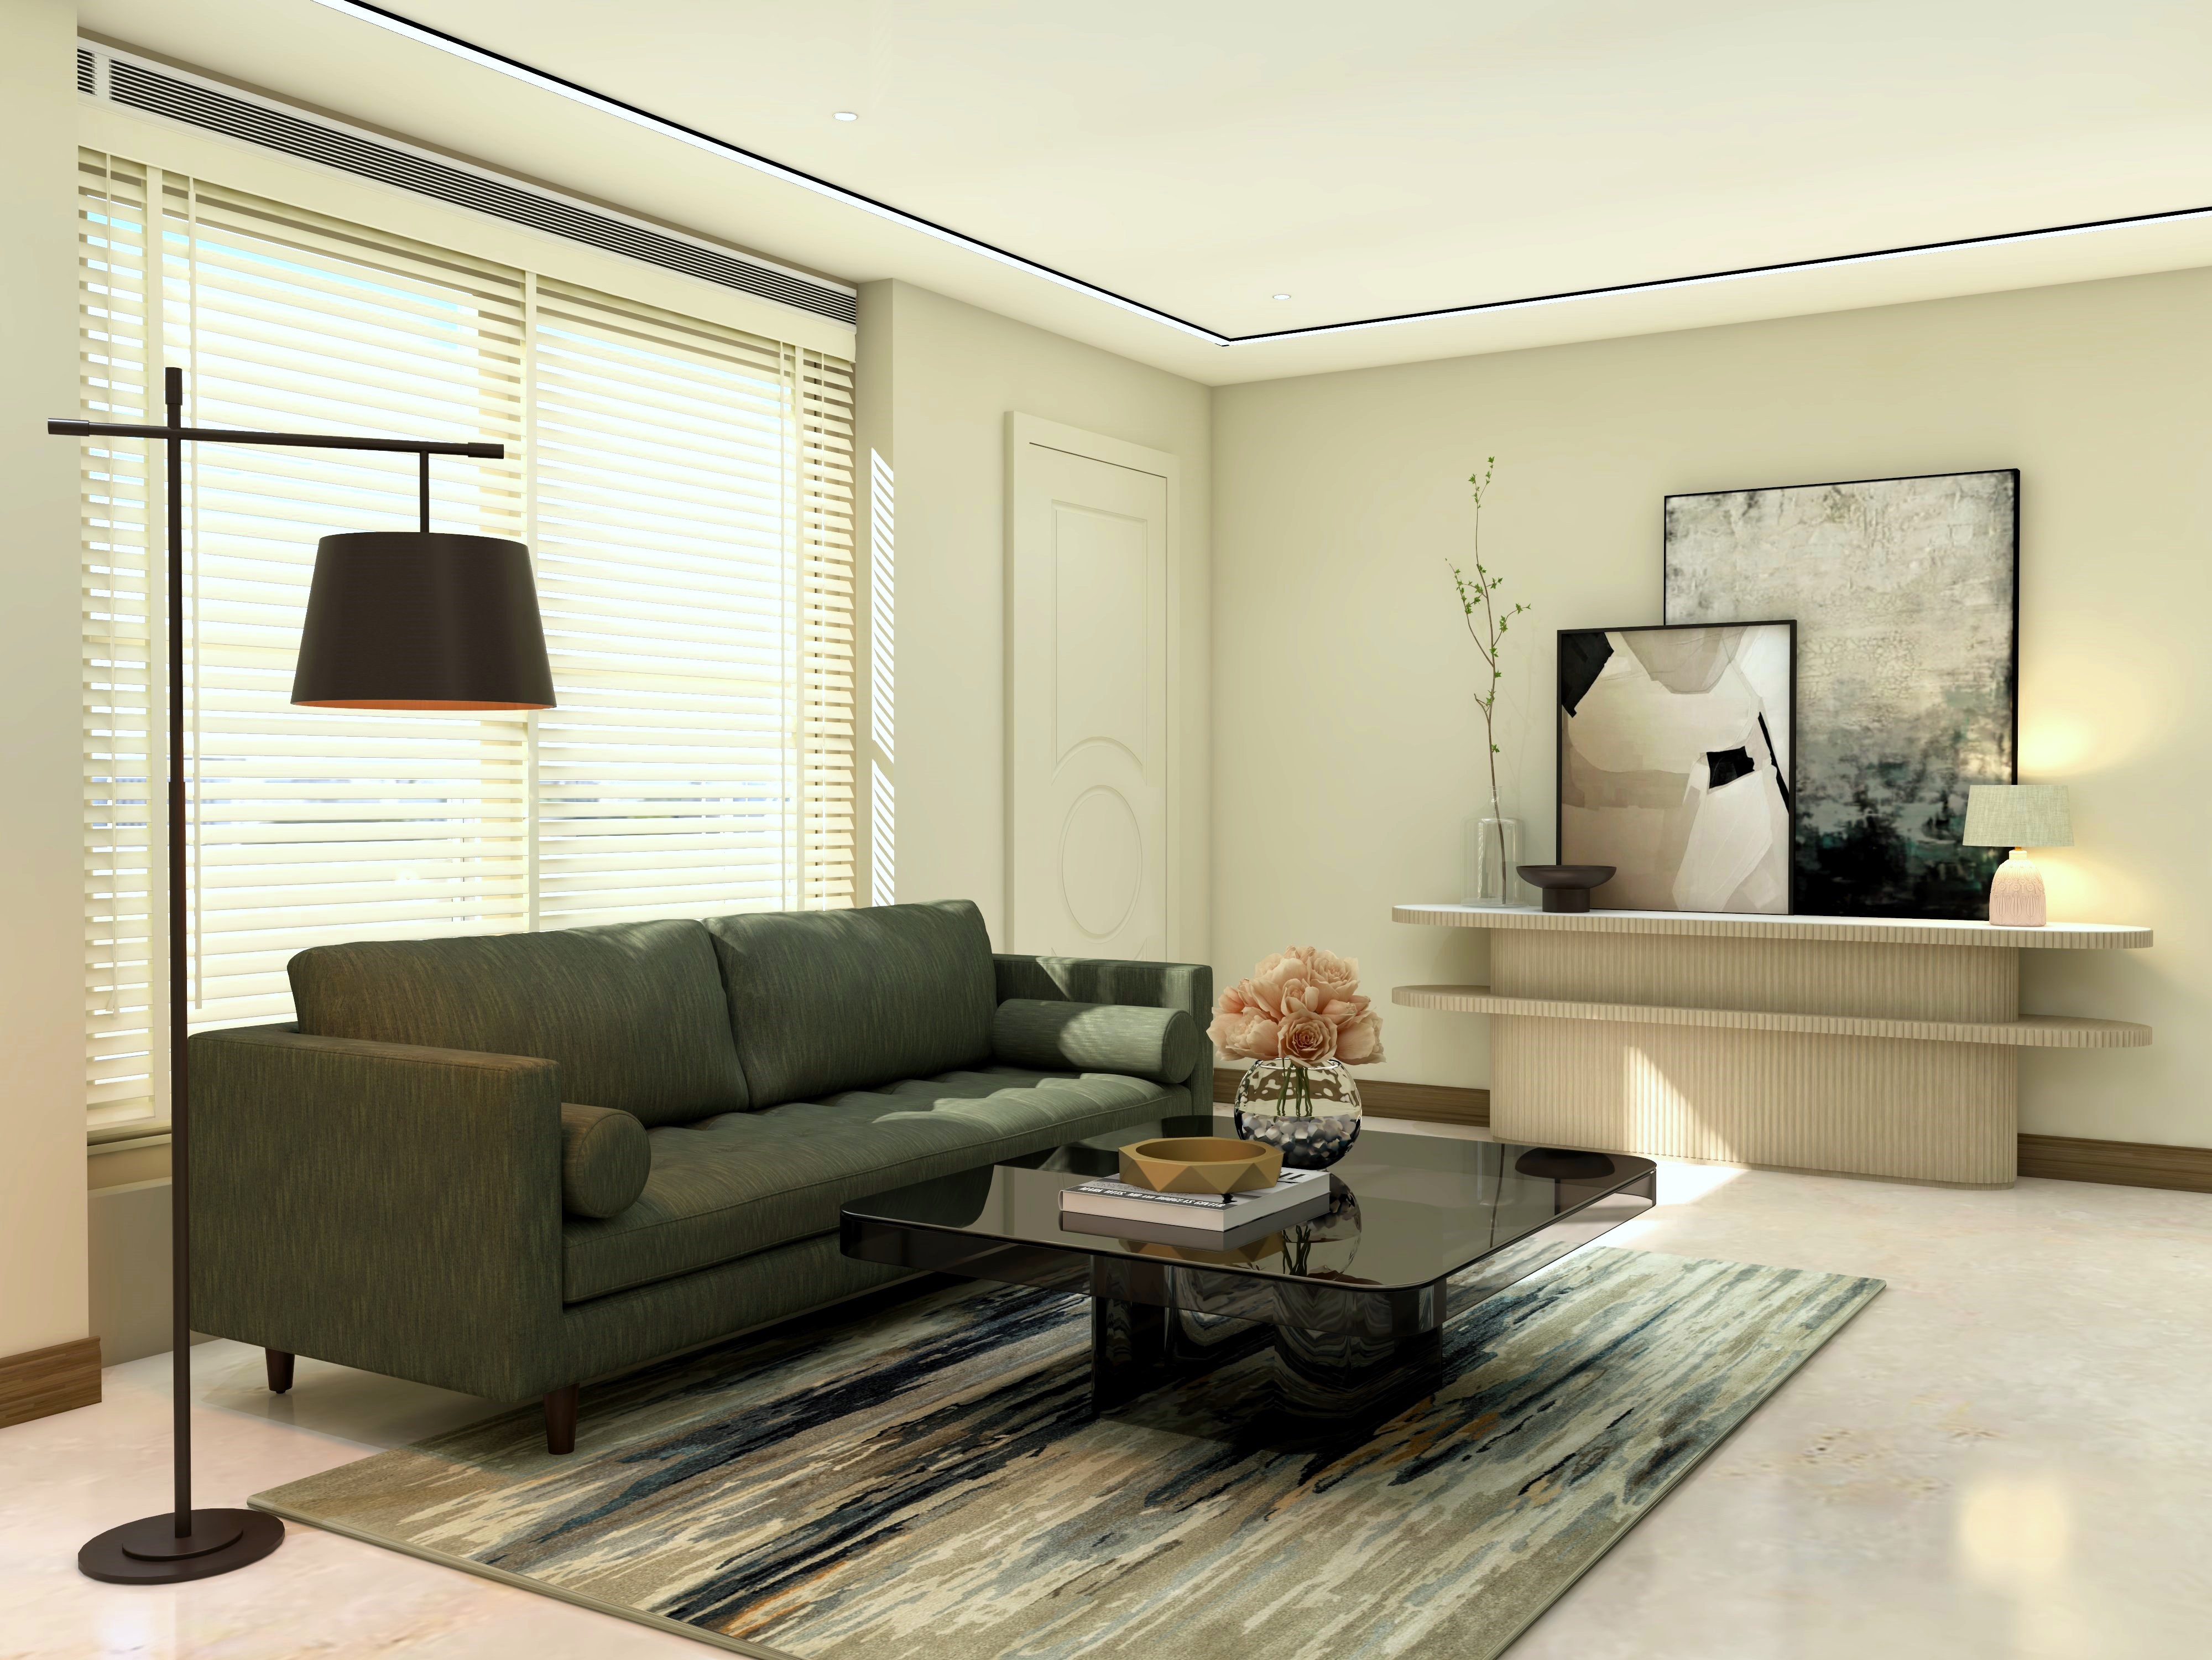 Living room with green sofa and beige console with artwork-Beautiful Homes